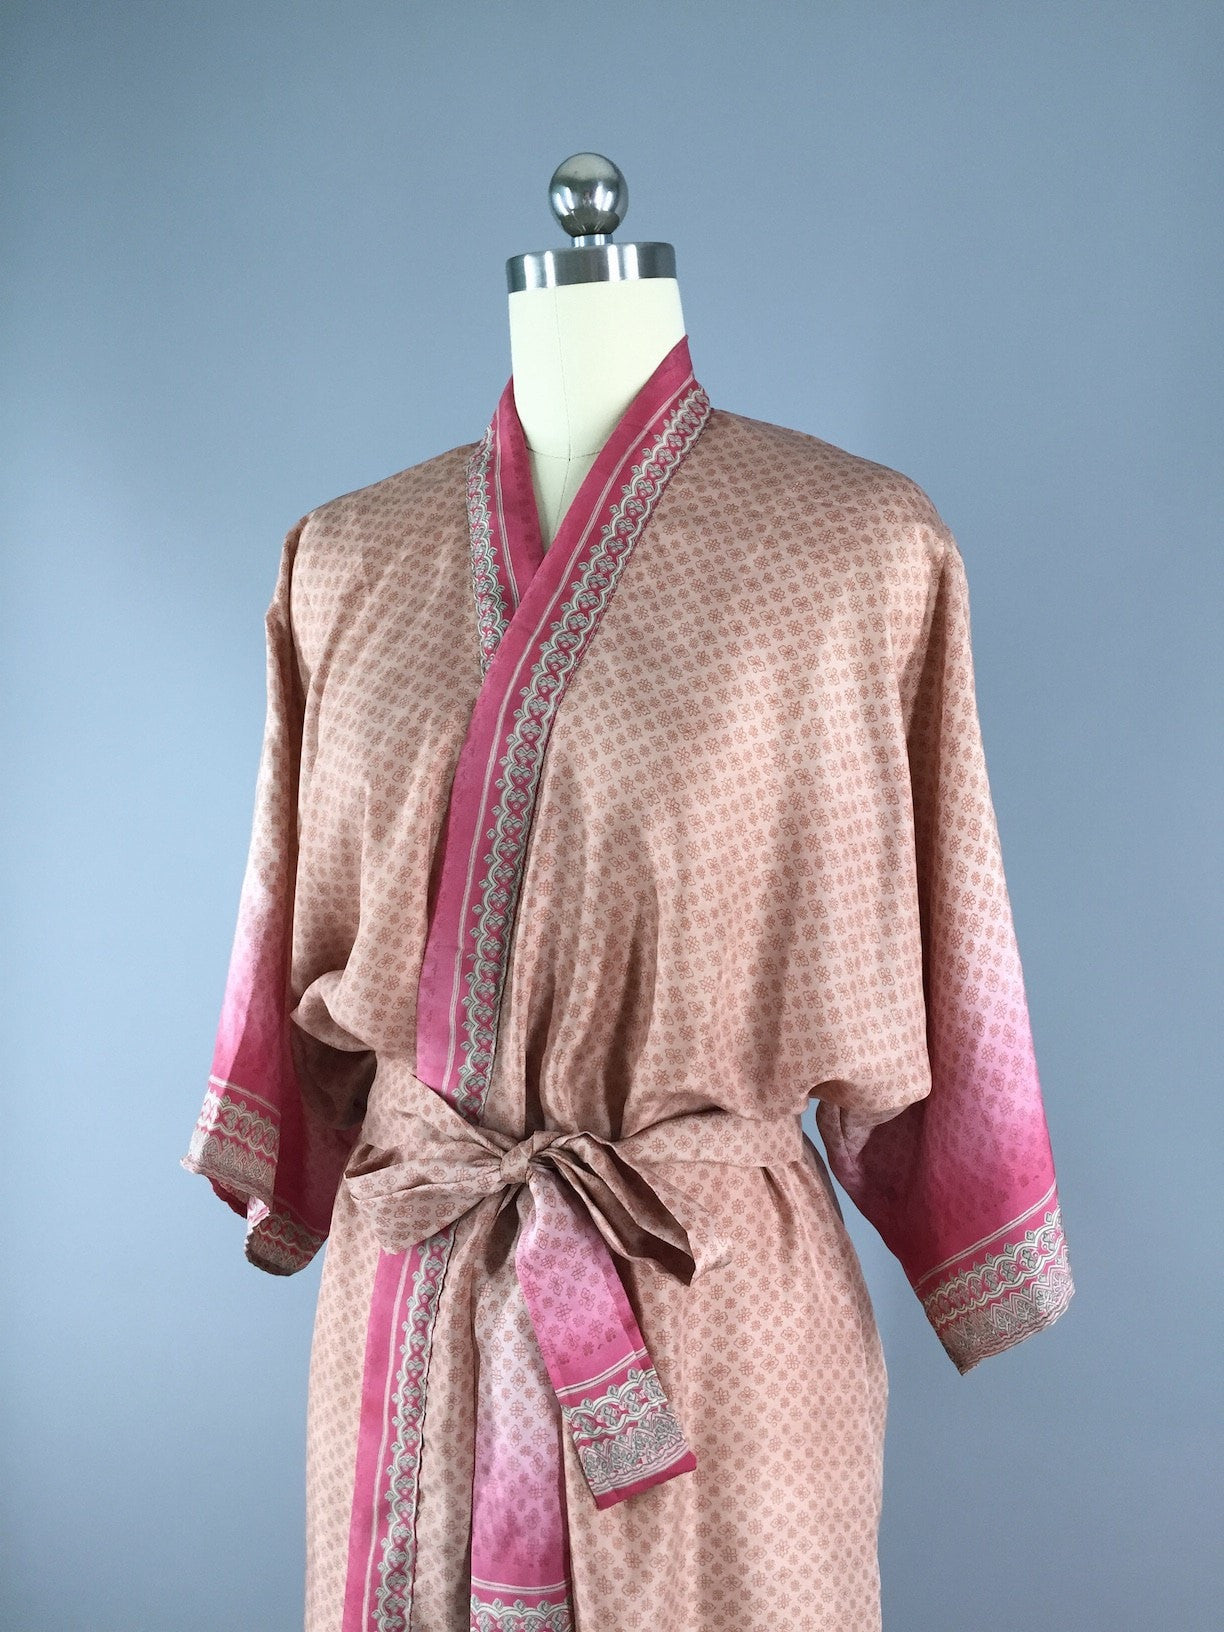 Pink Terracotta Floral Print Robe made from a Vintage Indian Sari - ThisBlueBird